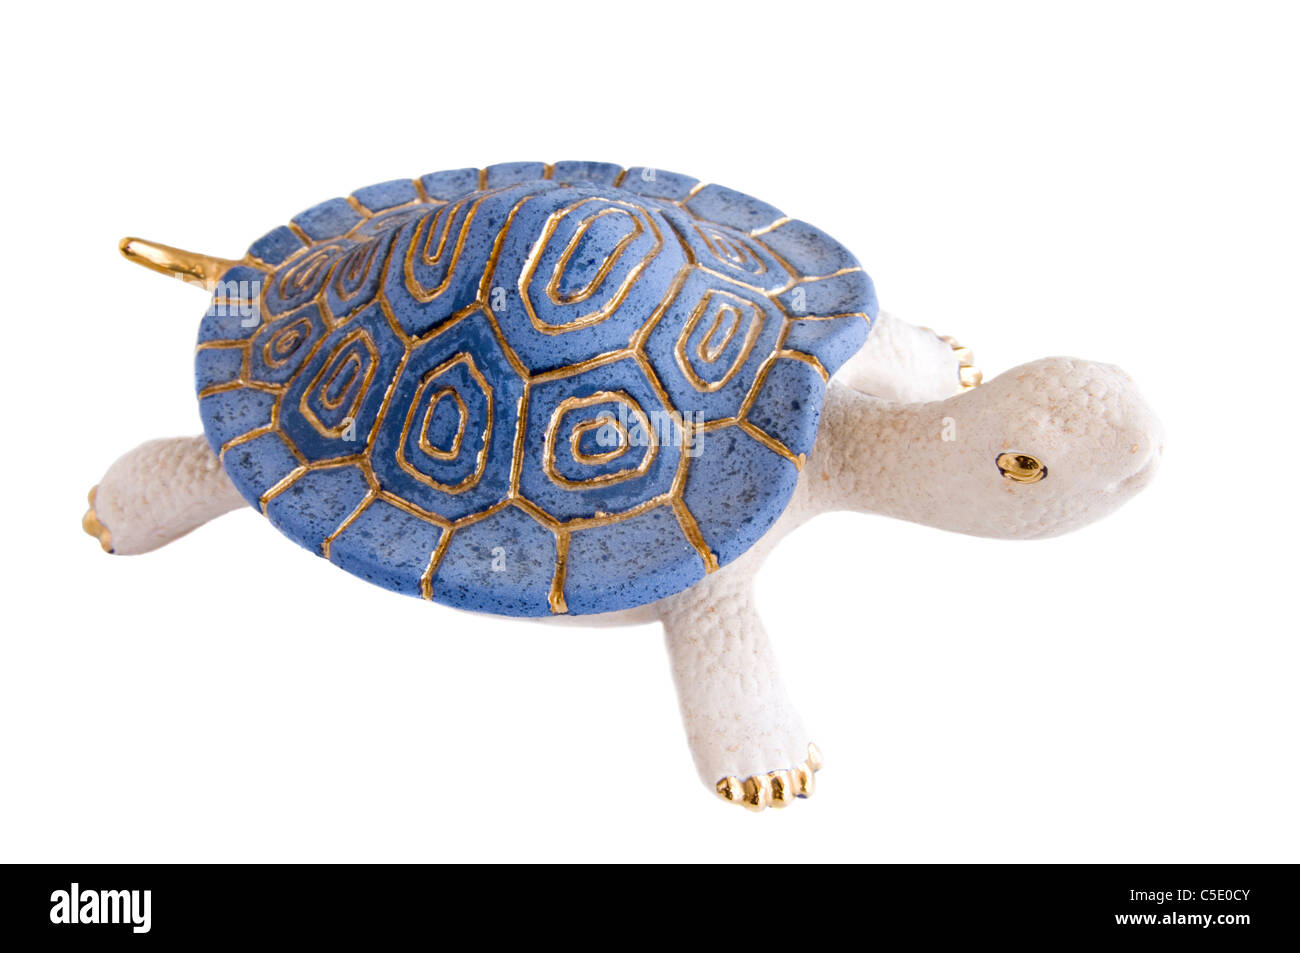 Blue and white painted clay turtle figurine against white background Stock Photo